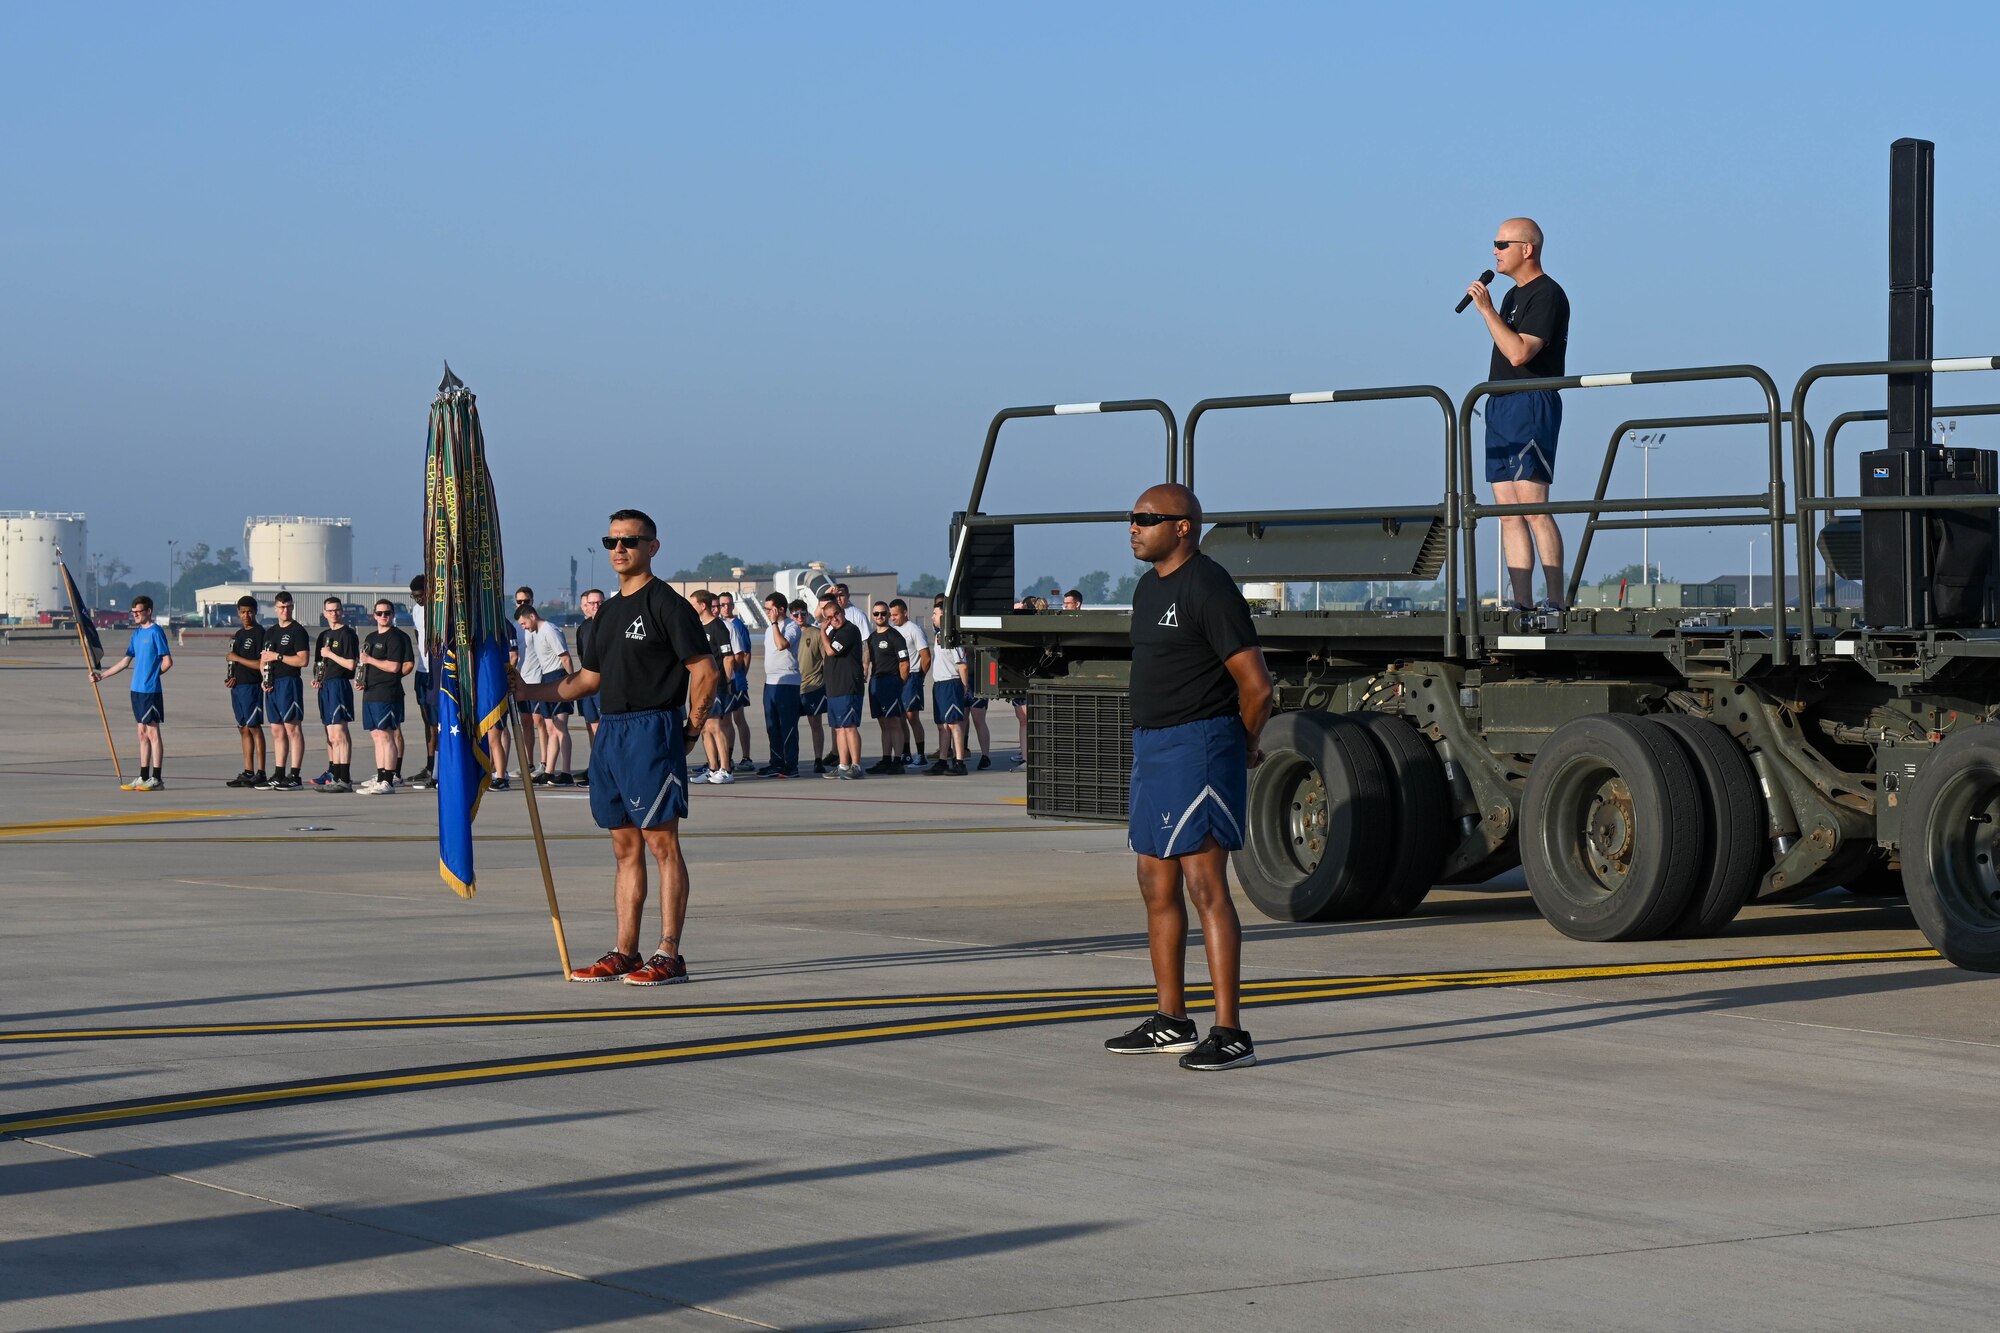 U.S. Air Force Col. Blaine Baker, 97th Air Mobility Wing (AMW) commander, addresses Airmen from the 97th AMW on the flight line at Altus Air Force Base, Oklahoma, May 12, 2023. This was Baker’s final run with the wing due to his upcoming change of command ceremony. (U.S. Air Force photo by Senior Airman Trenton Jancze)